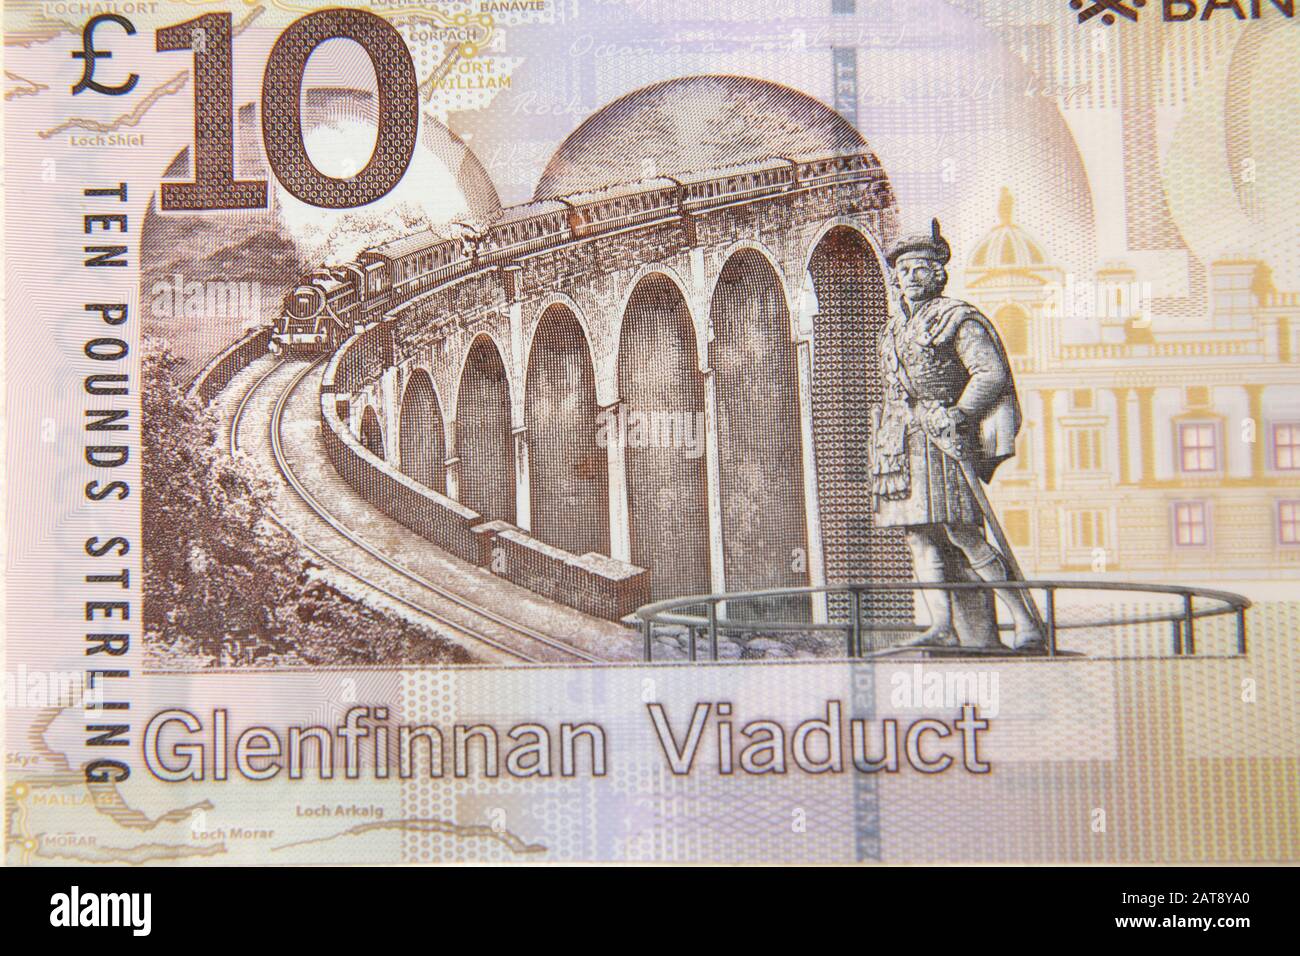 Bank of Scotland Ten Pound Note Note Depicting Glenfinnan Viaduct Stock Photo